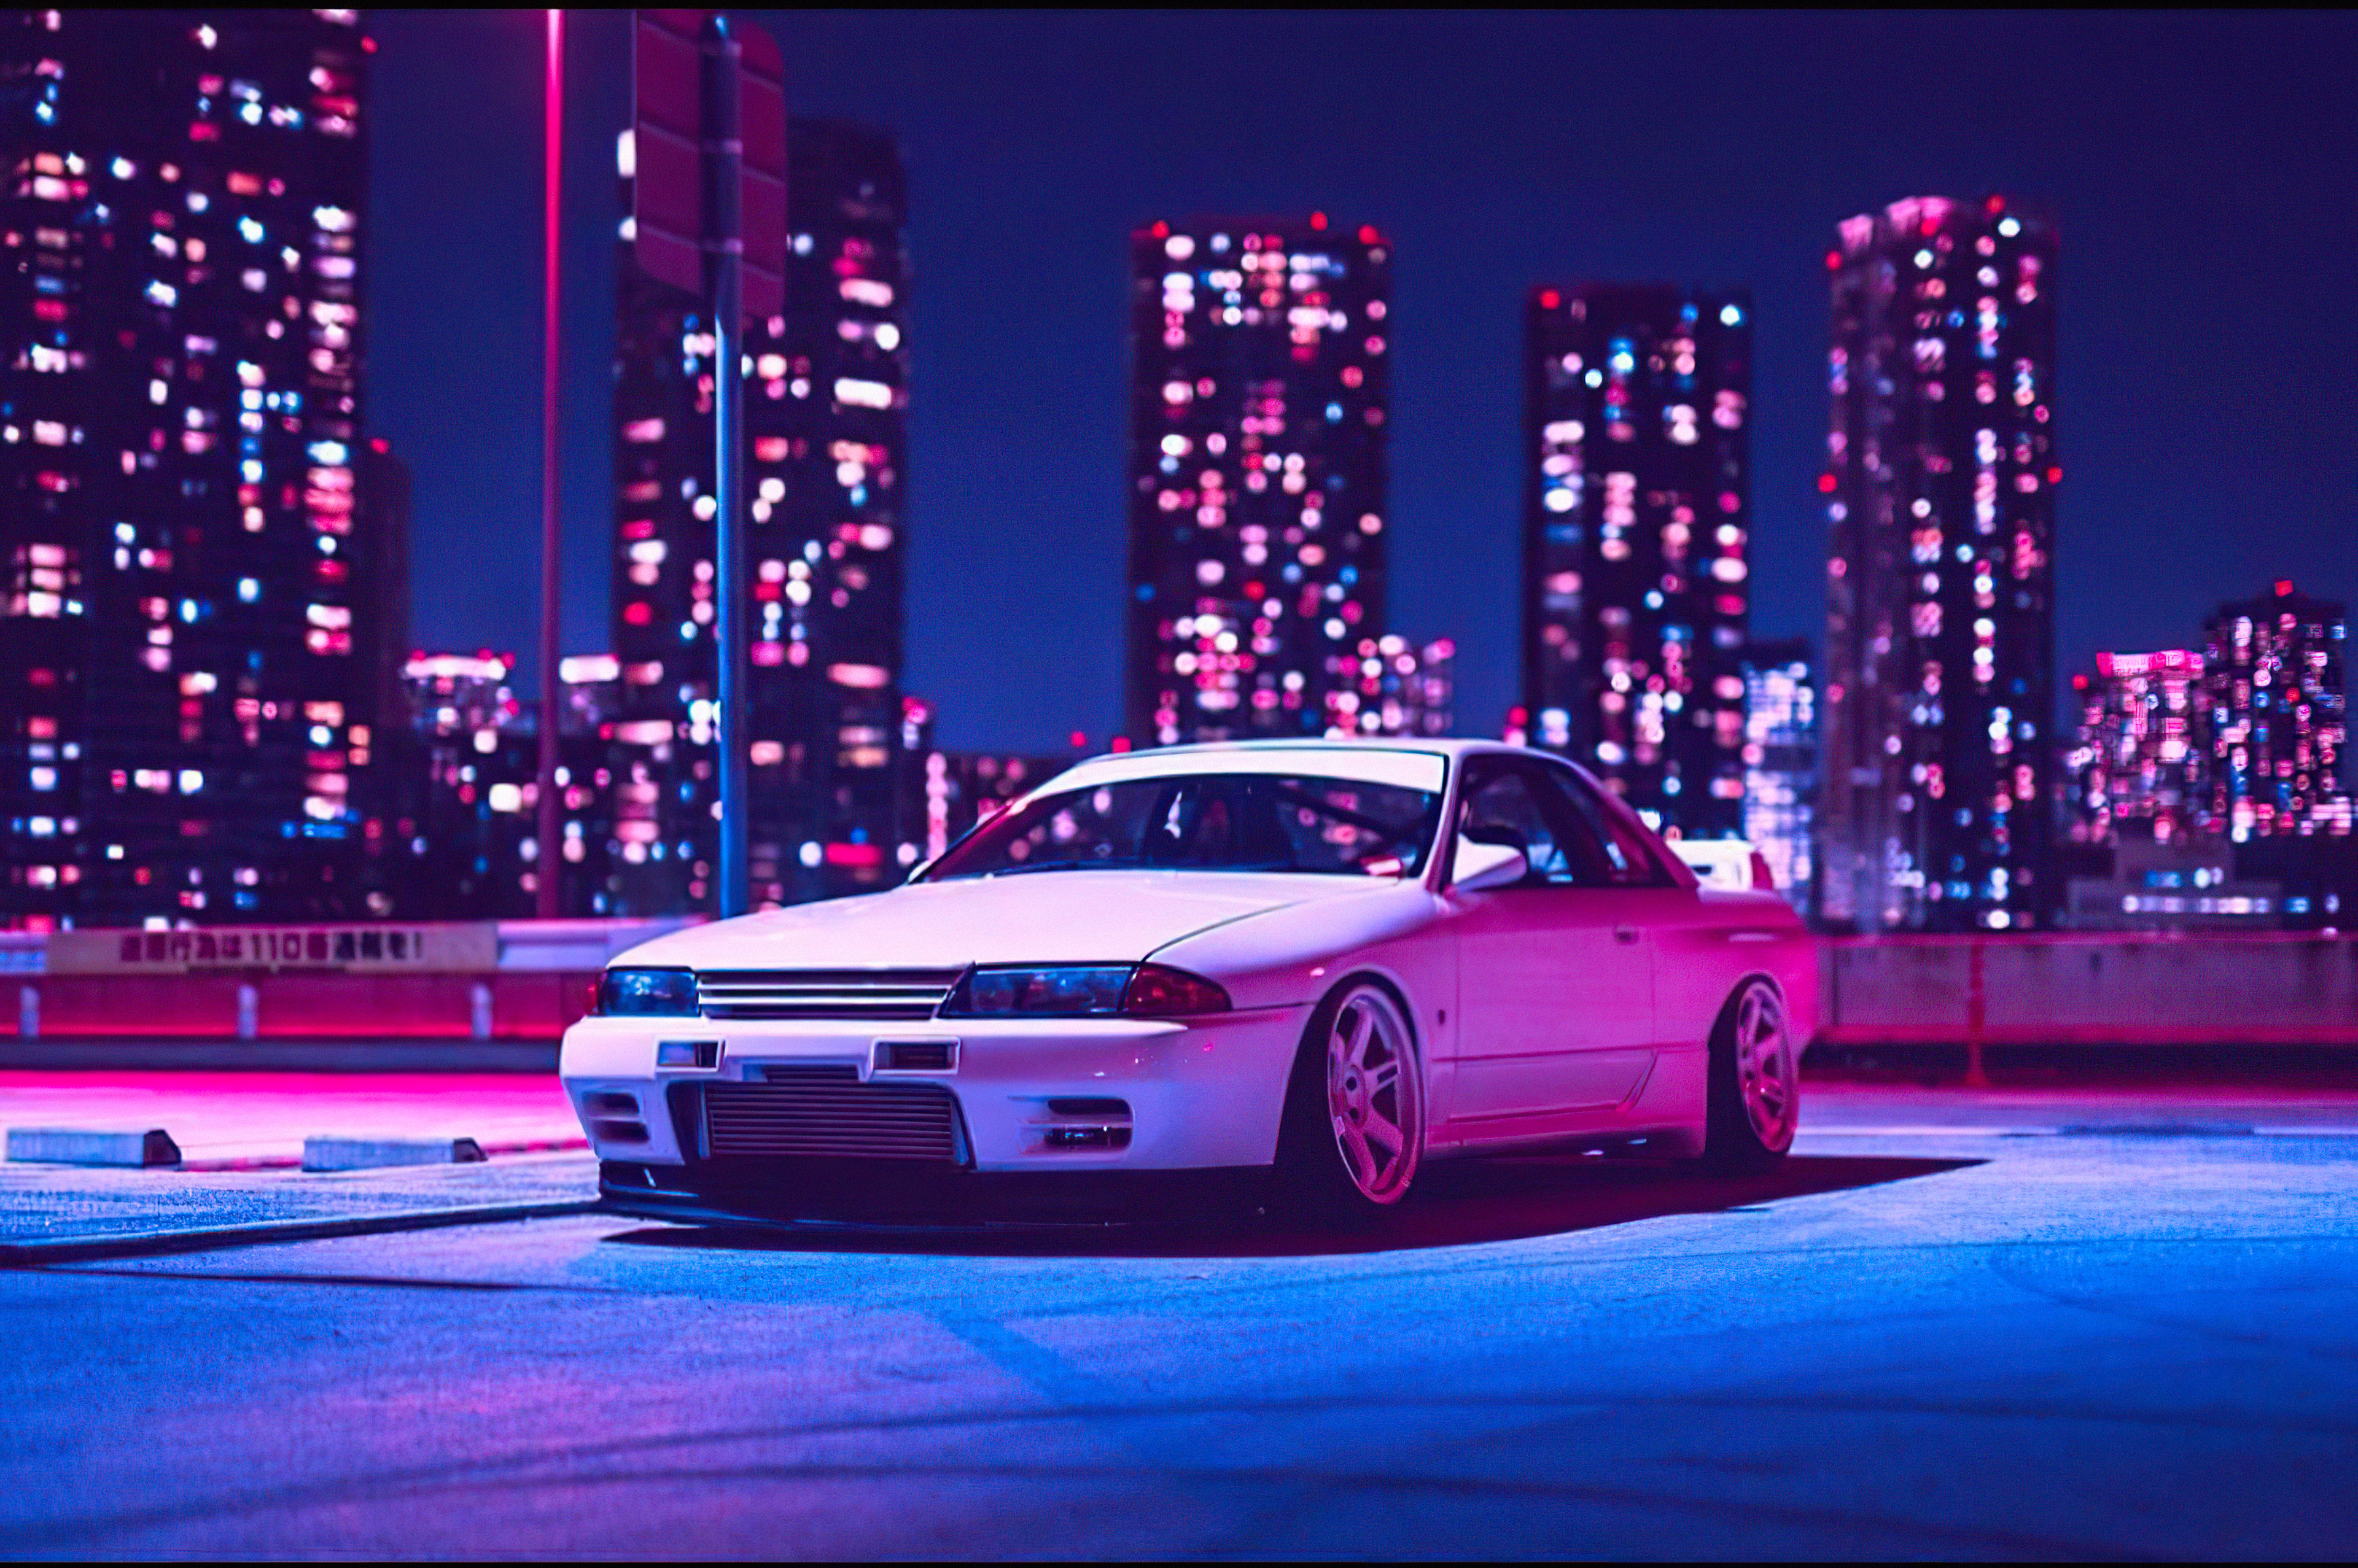 1080x19 Nissan Skyline R32 Retrowave 4k Iphone 7 6s 6 Plus Pixel Xl One Plus 3 3t 5 Hd 4k Wallpapers Images Backgrounds Photos And Pictures